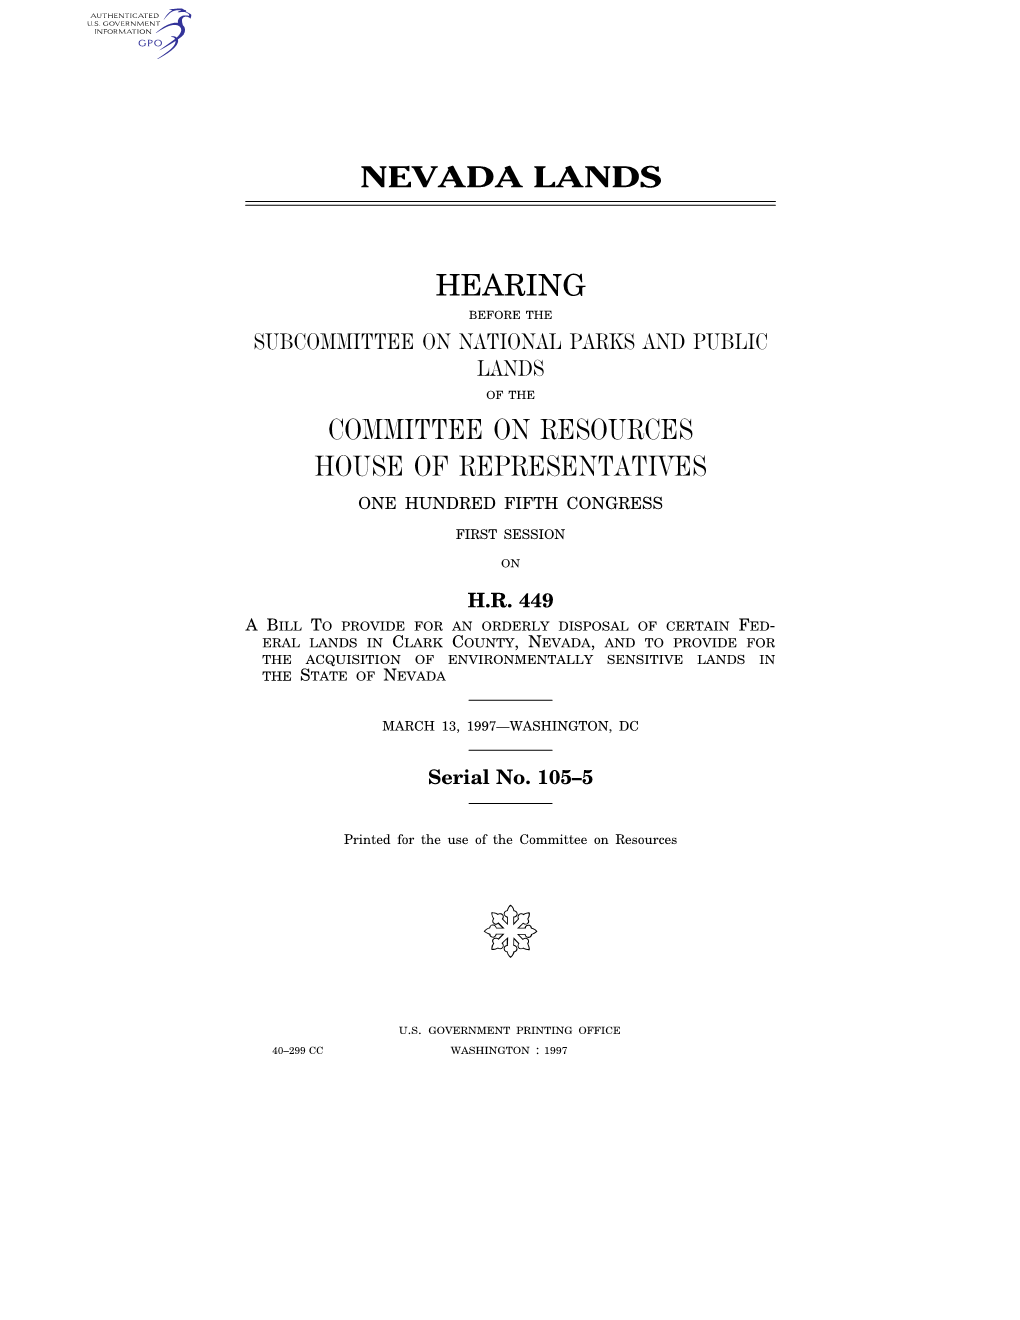 Nevada Lands Hearing Committee on Resources